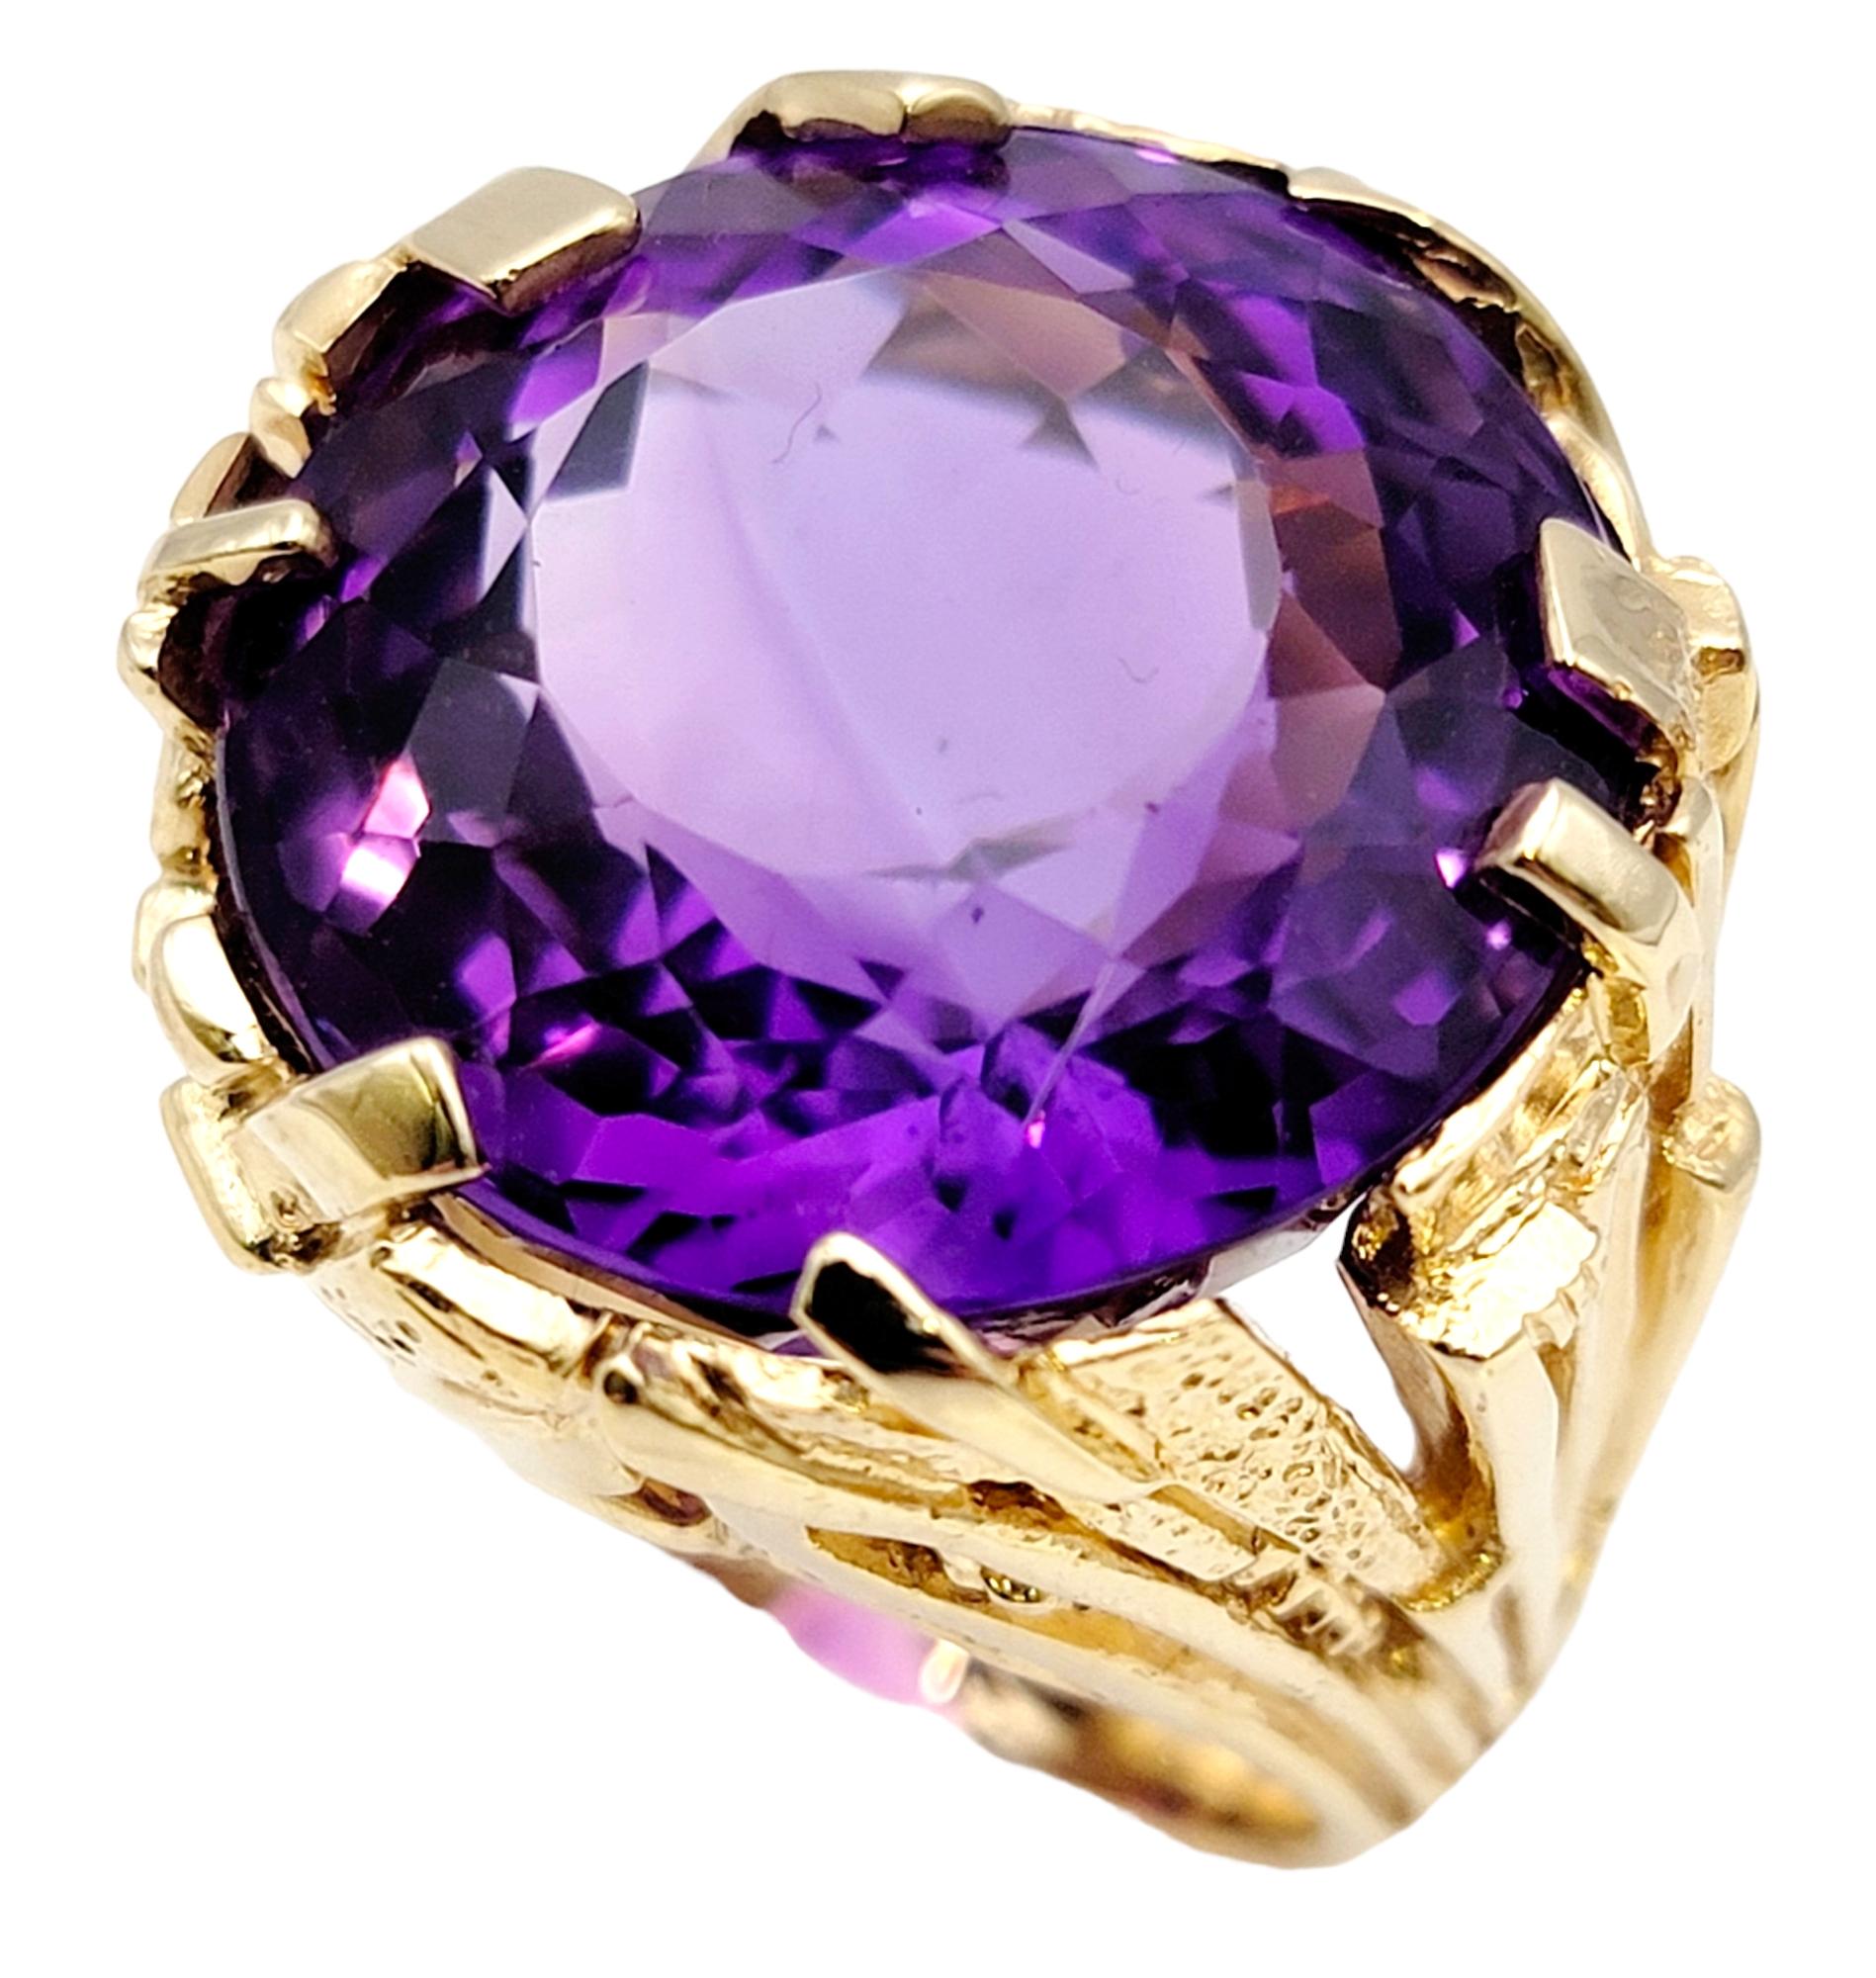 Massive 40.01 Carat Round Cut Amethyst Solitaire Cocktail Ring in Yellow Gold  For Sale